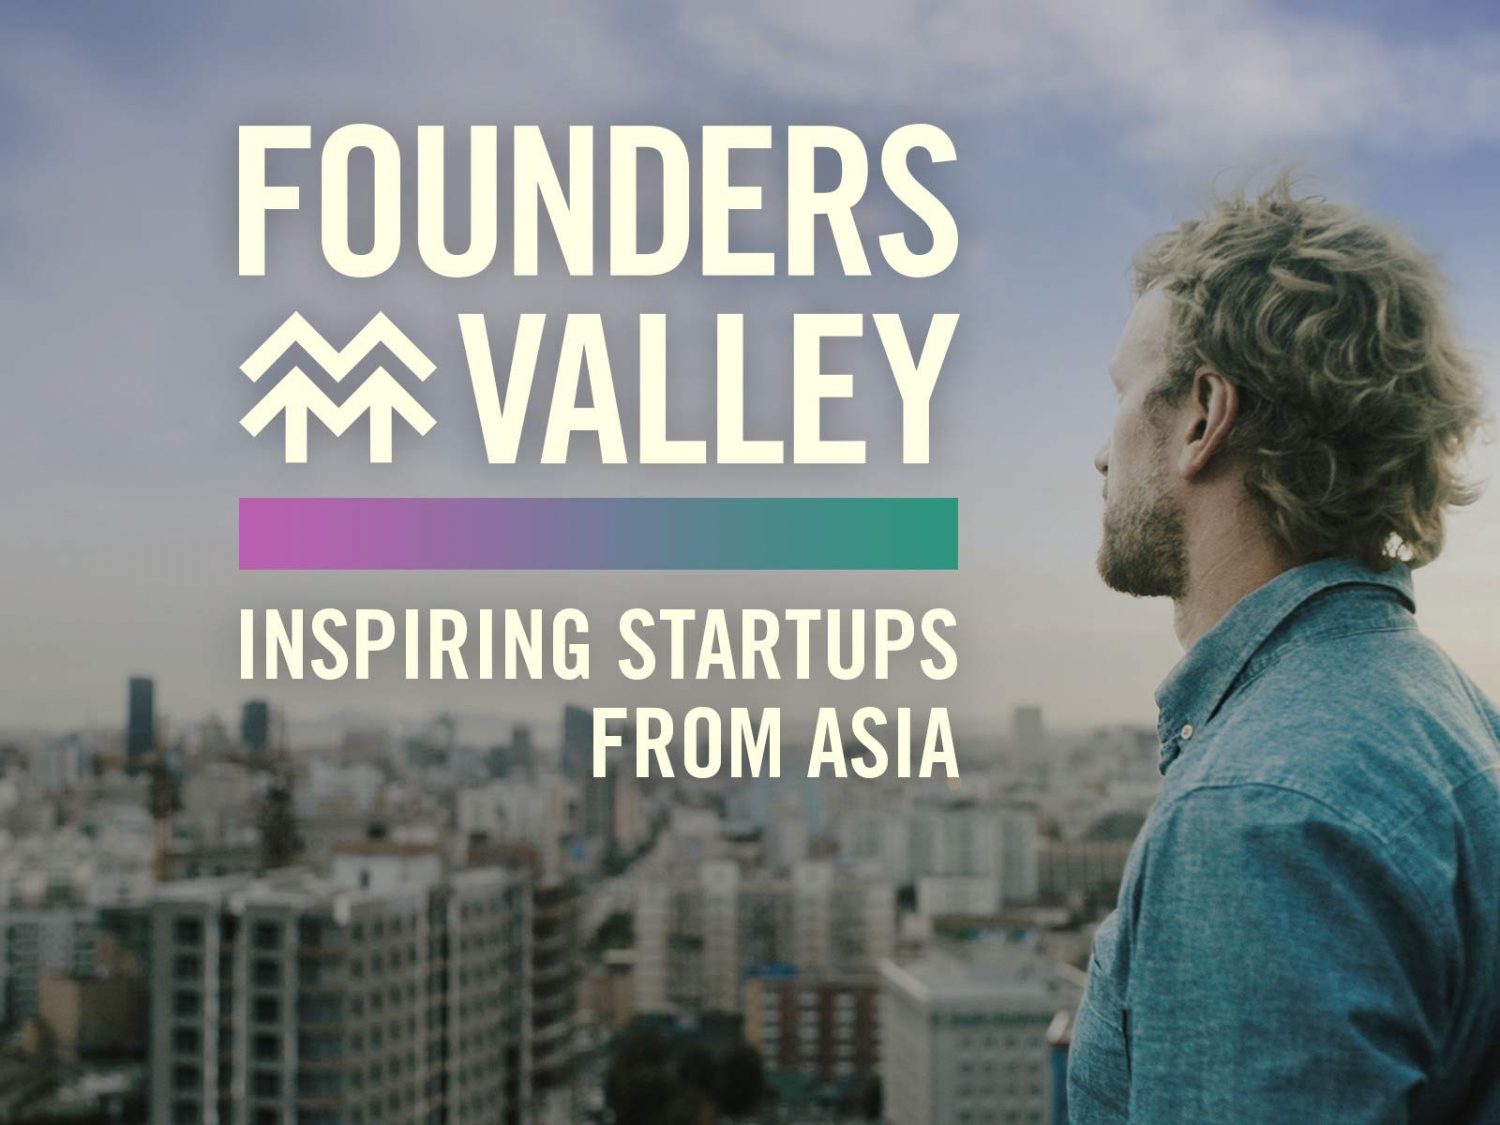 Logo de la startup Founders Valley - Asia's Innovative and Inspiring Startups